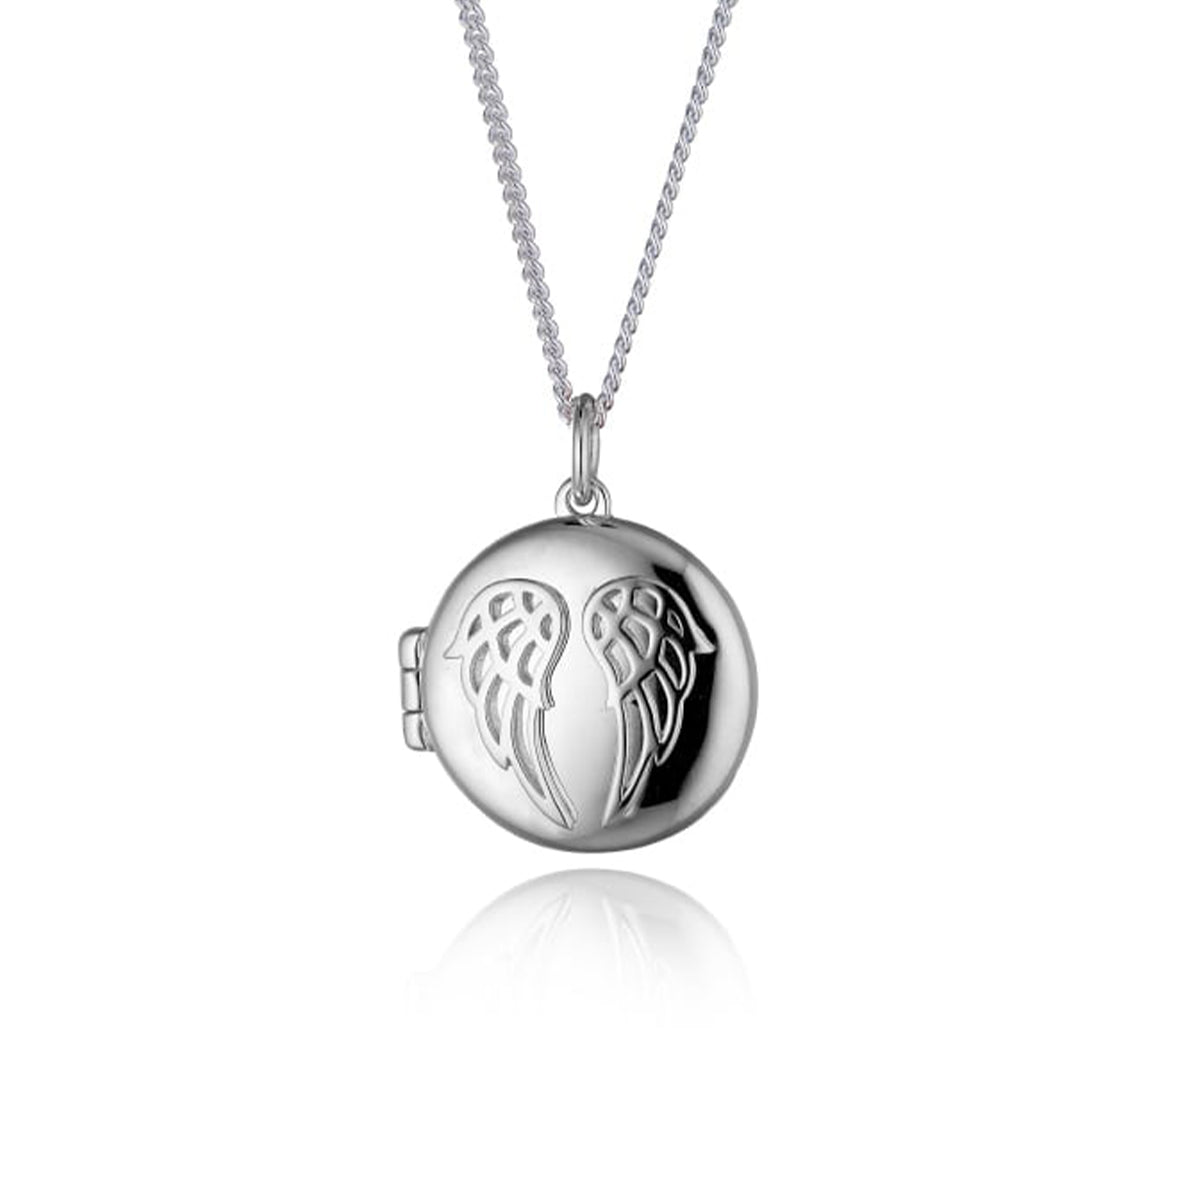 Steff Highgate Silver Wing Locket with Chain - Steffans Jewellers